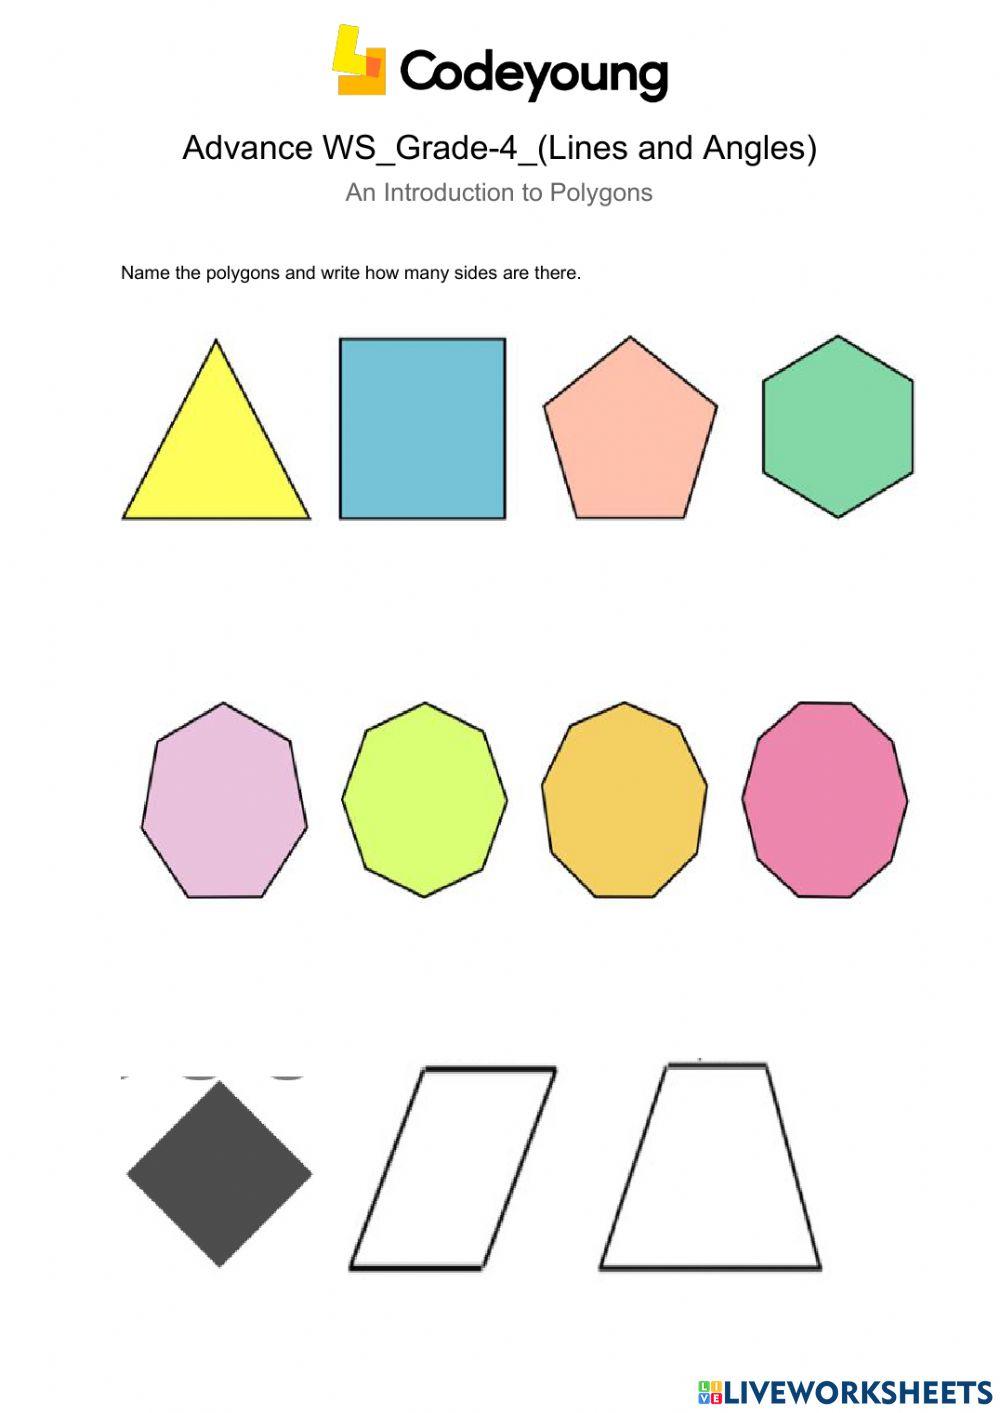 An Introduction to Polygons(advance)